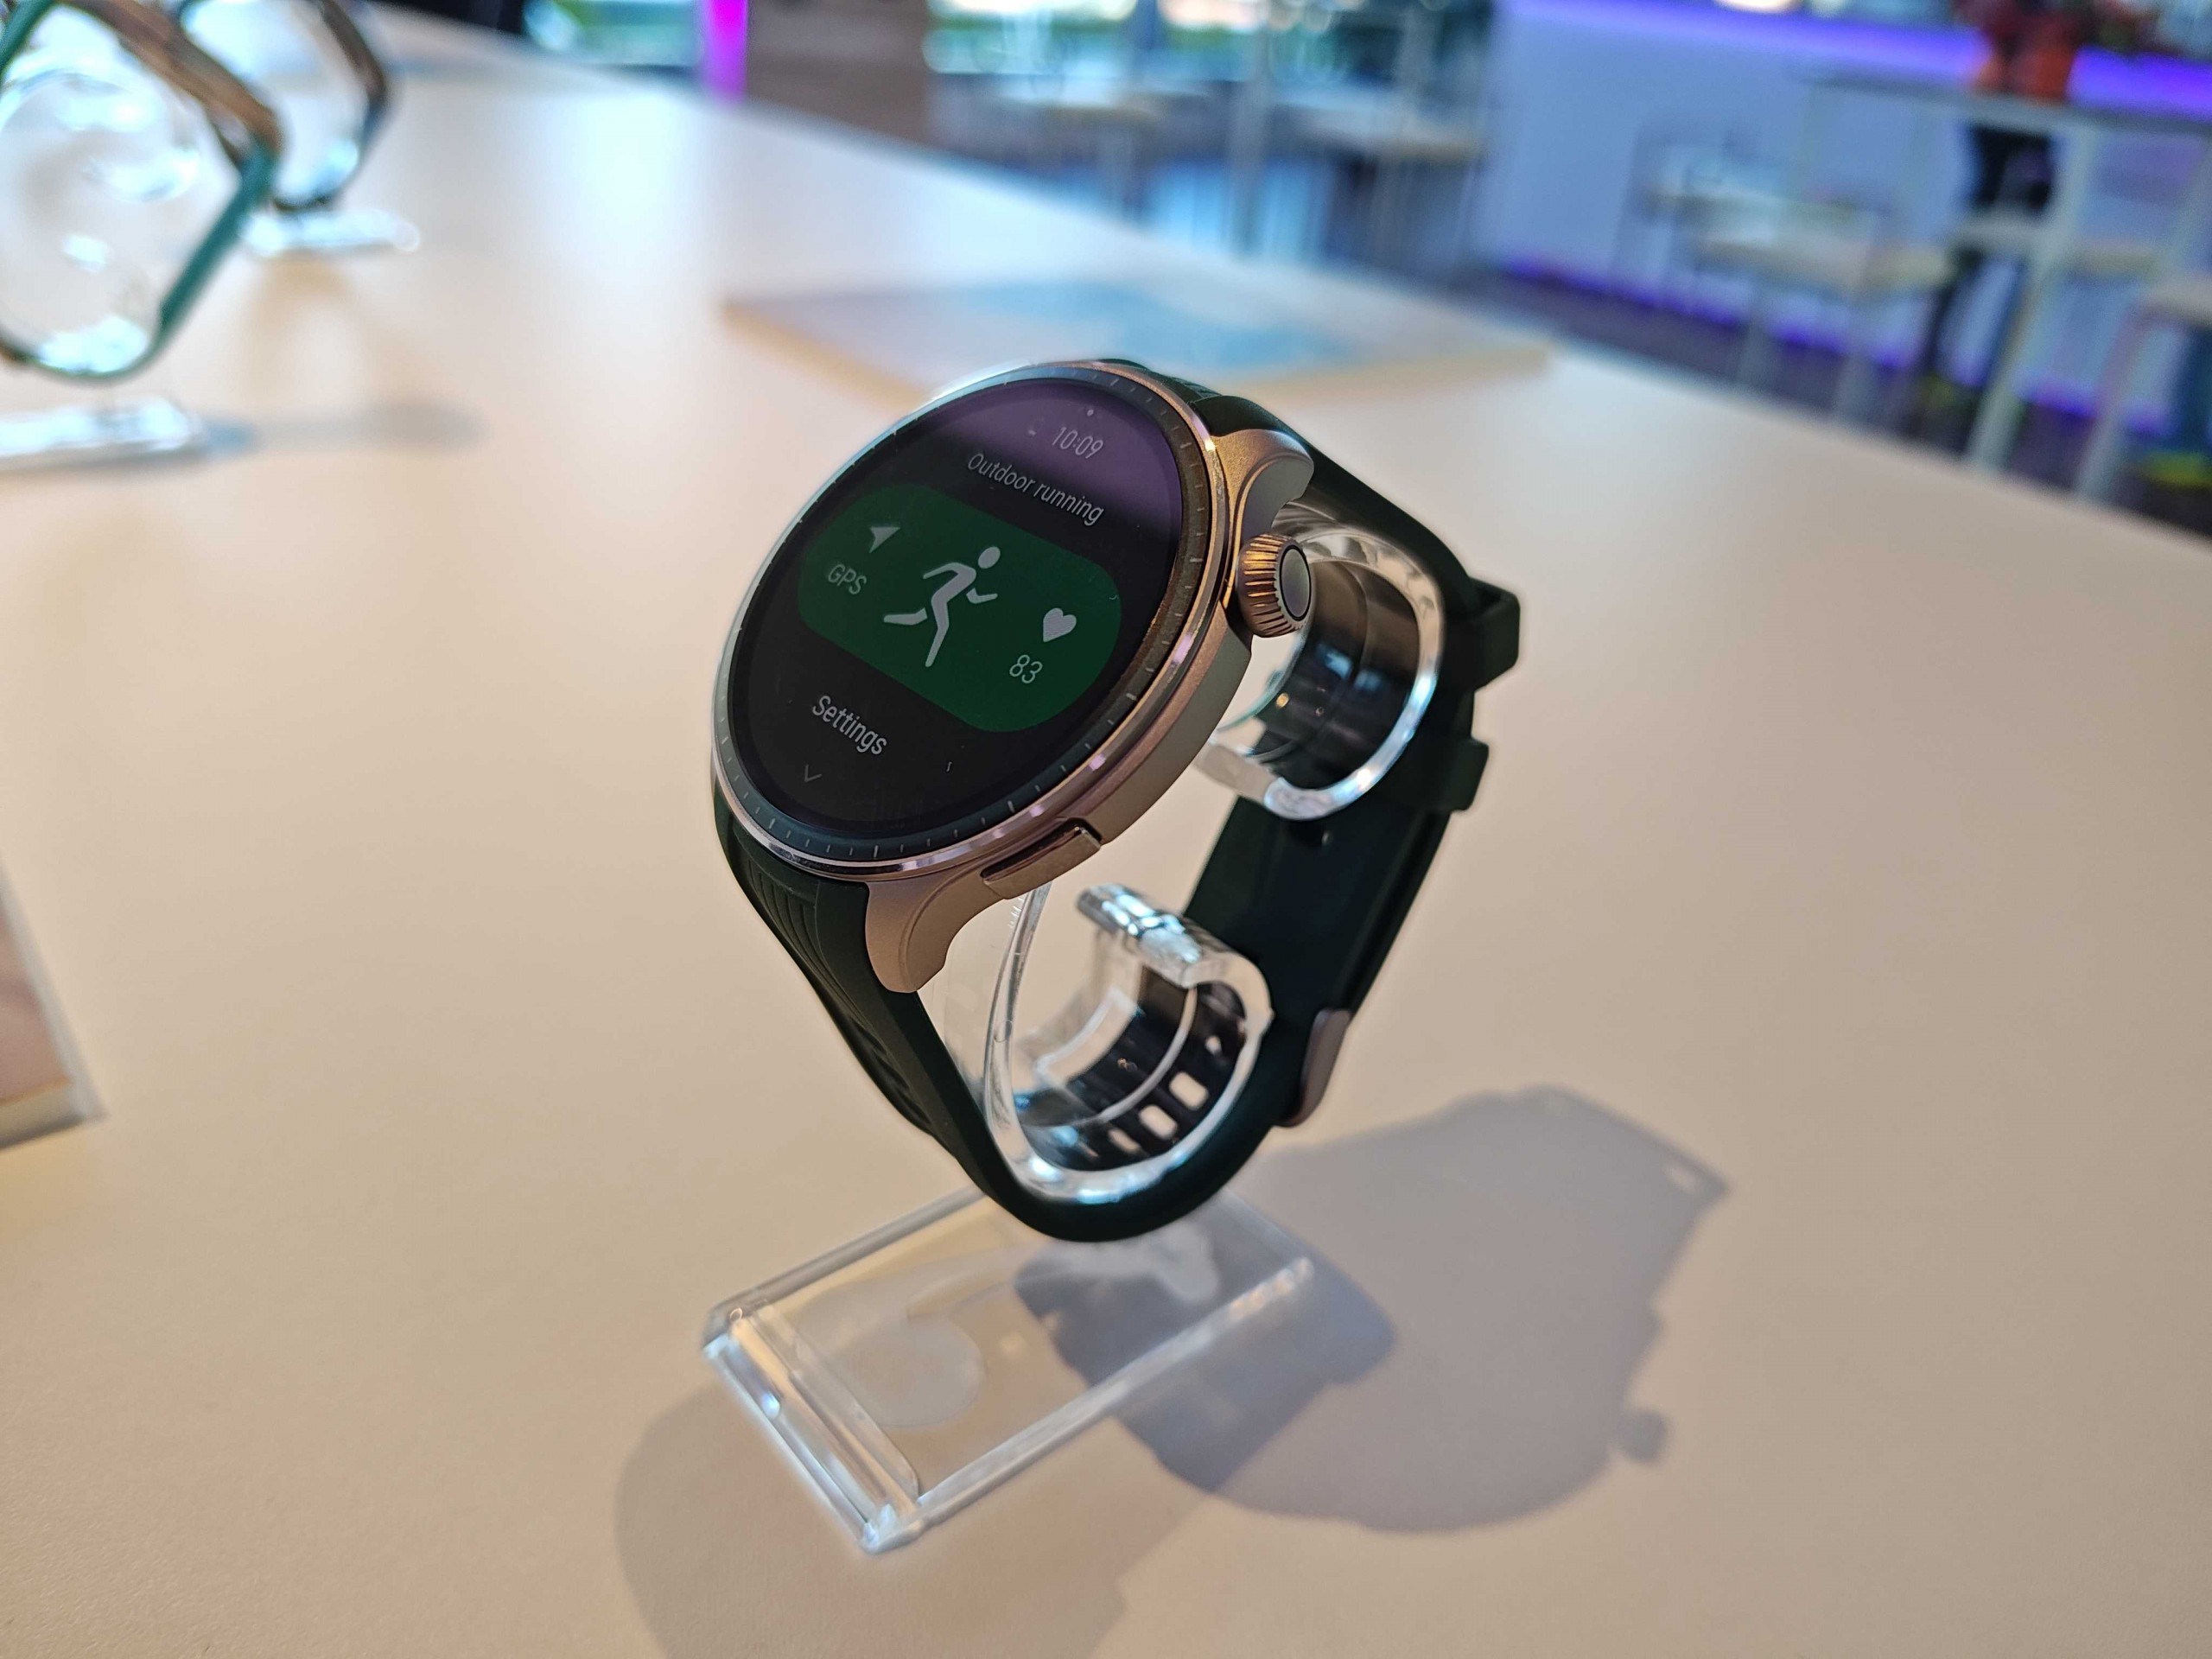 Amazfit Balance Smartwatch With AI Launches at IFA 2023